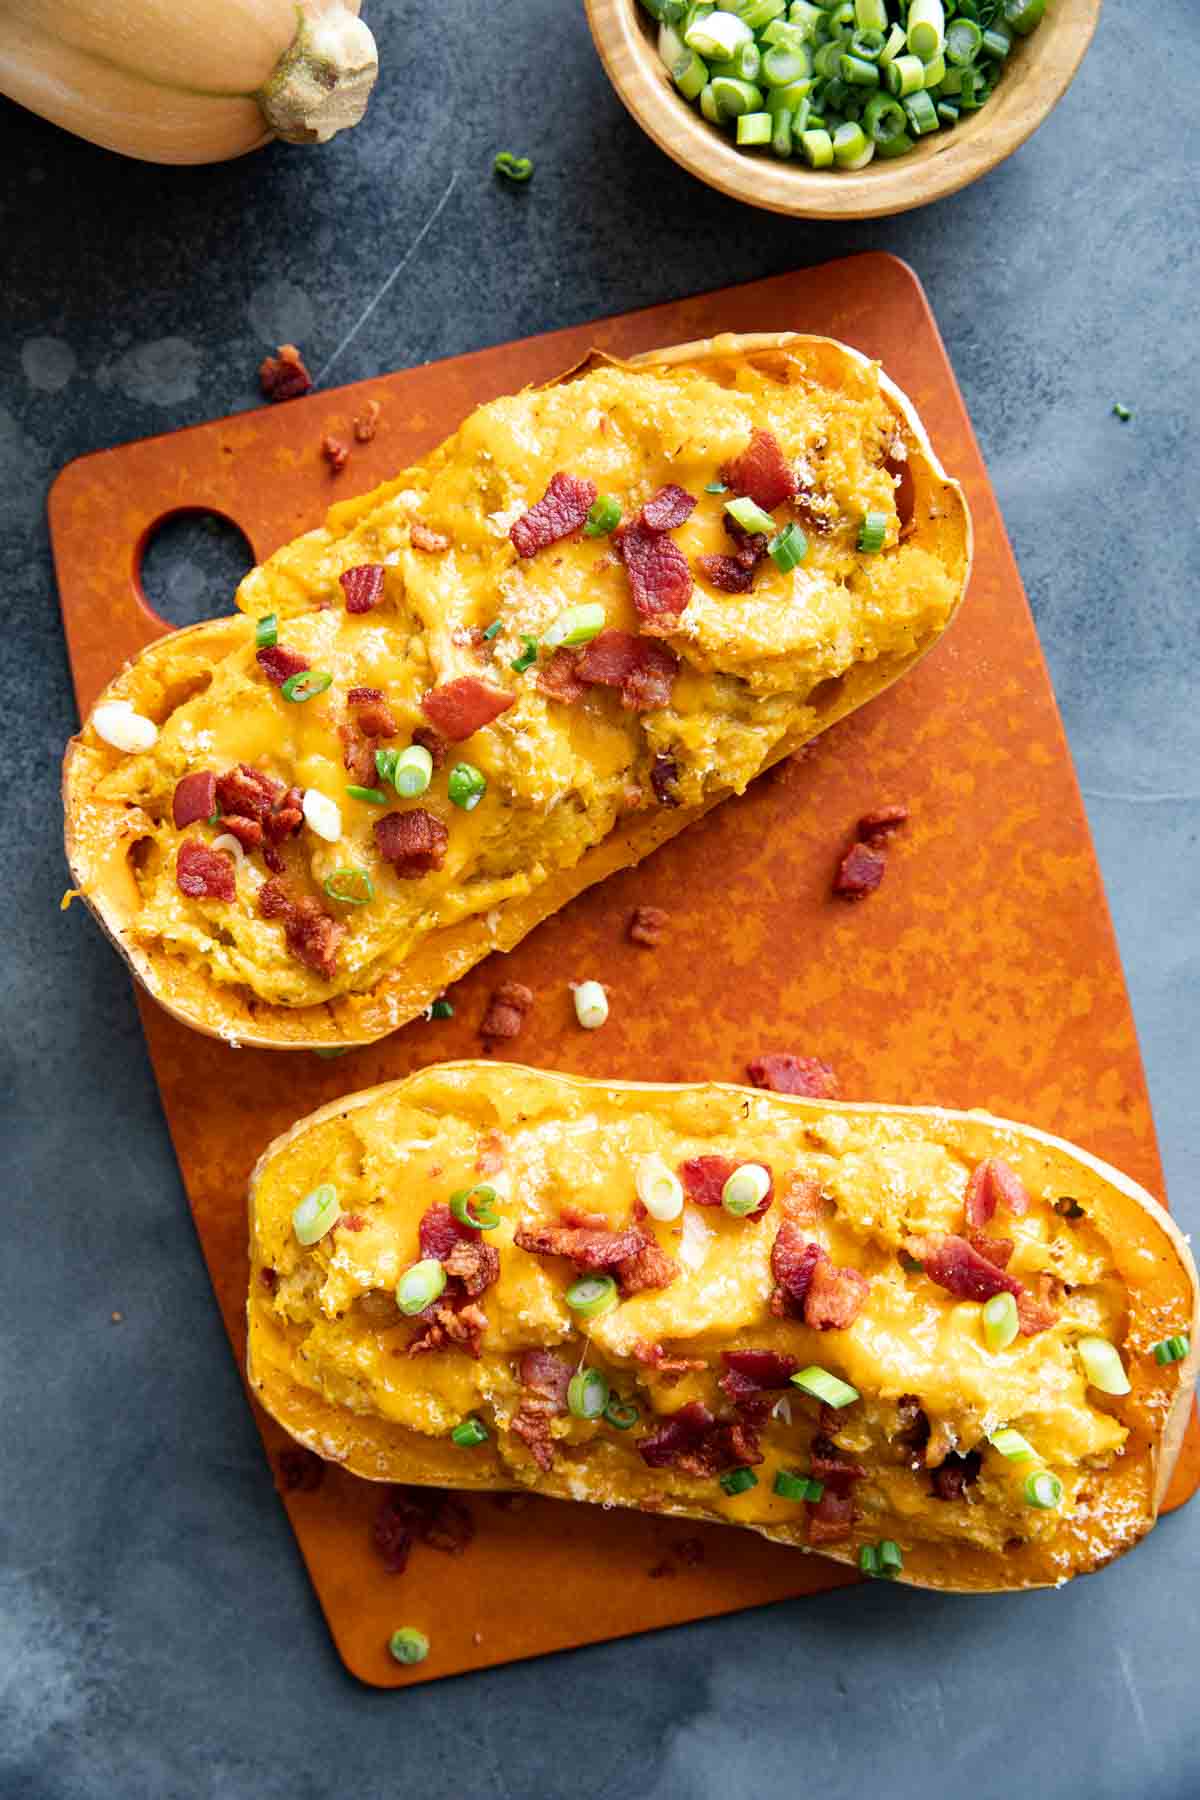 Two butternut squash halves filled with butternut squash, cheese, and bacon.